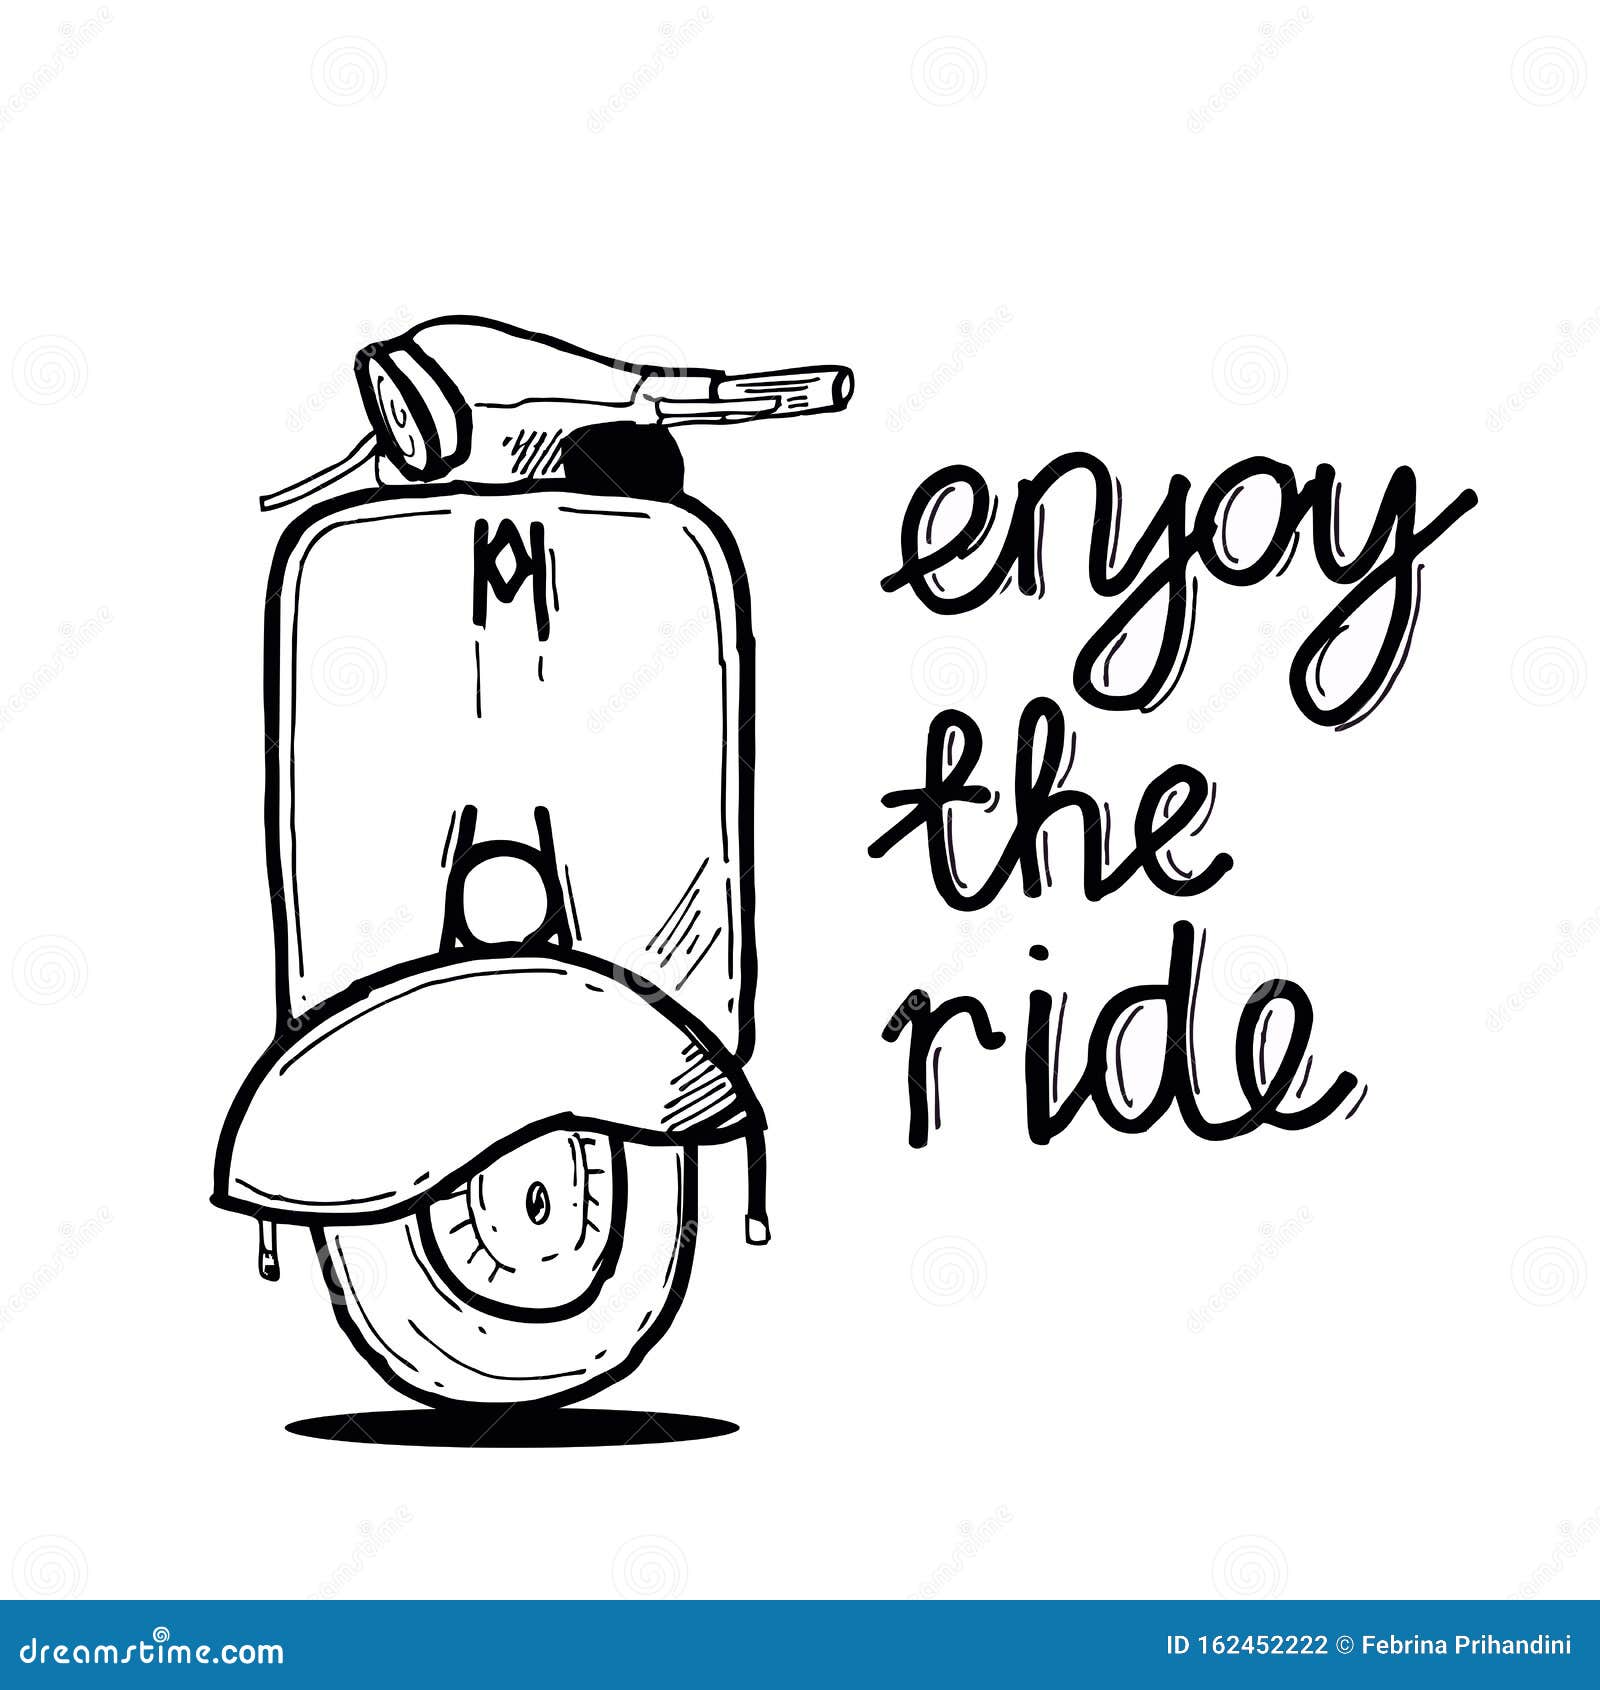 Enjoy the Ride stock vector. Illustration of trip, vacation - 162452222